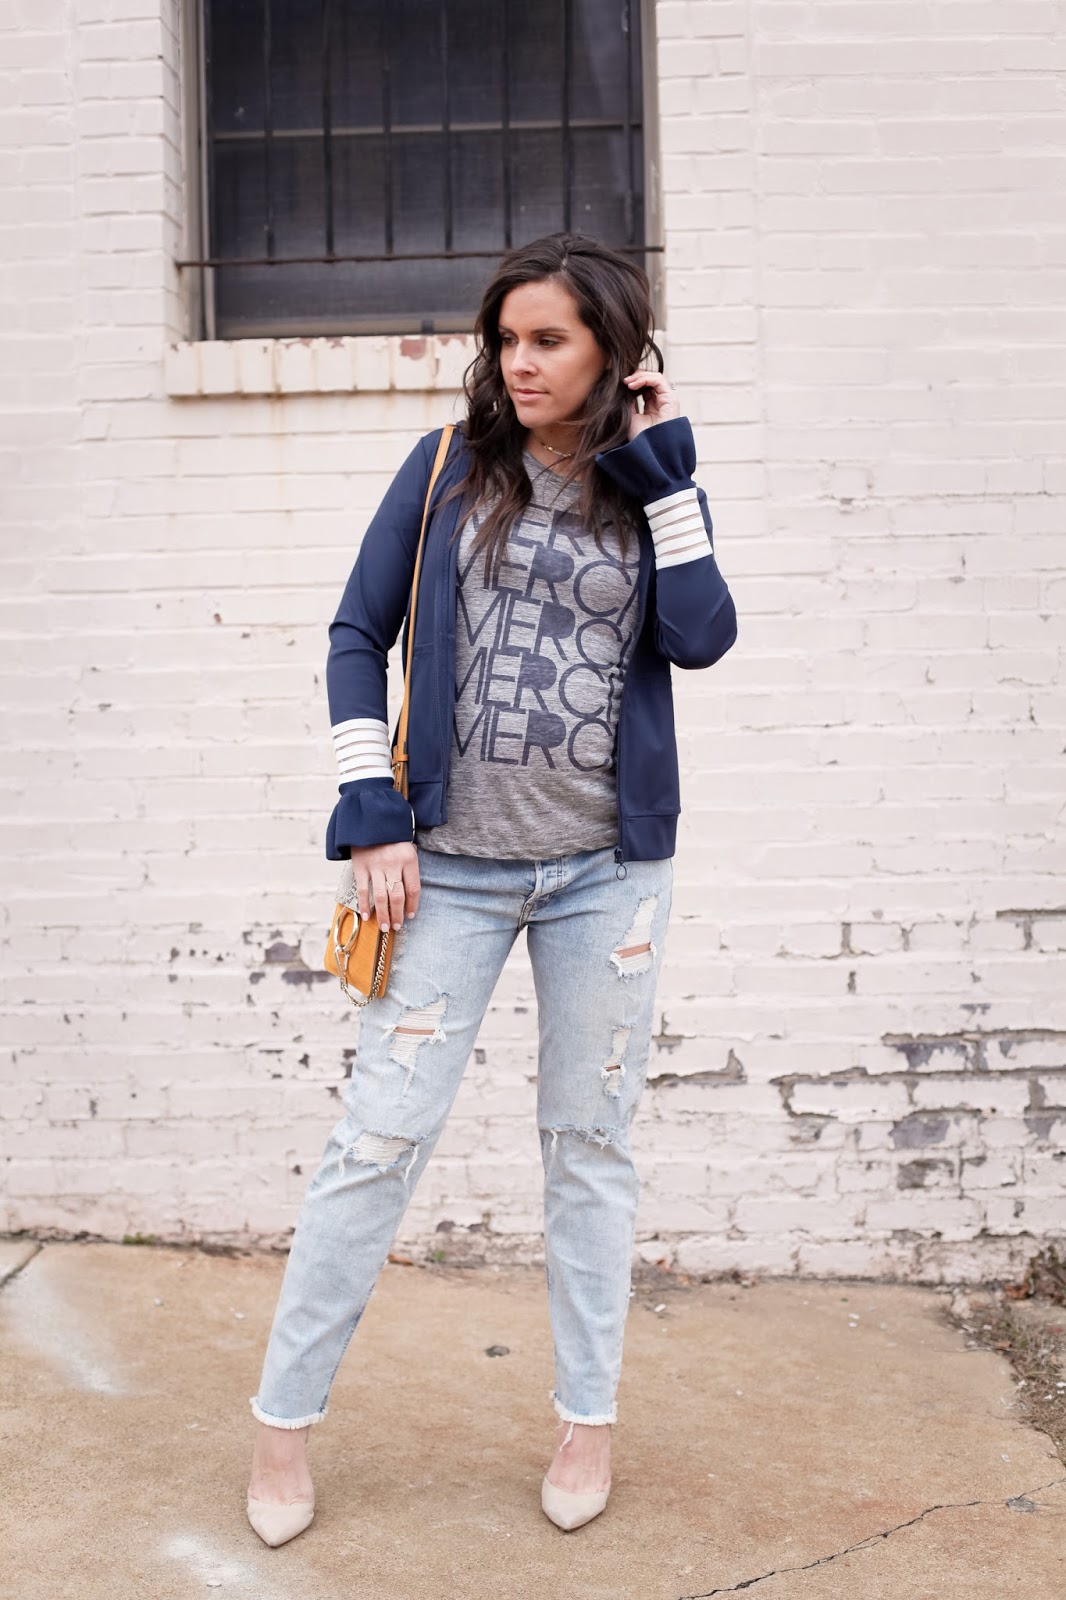 Distressed jeans and a track jacket